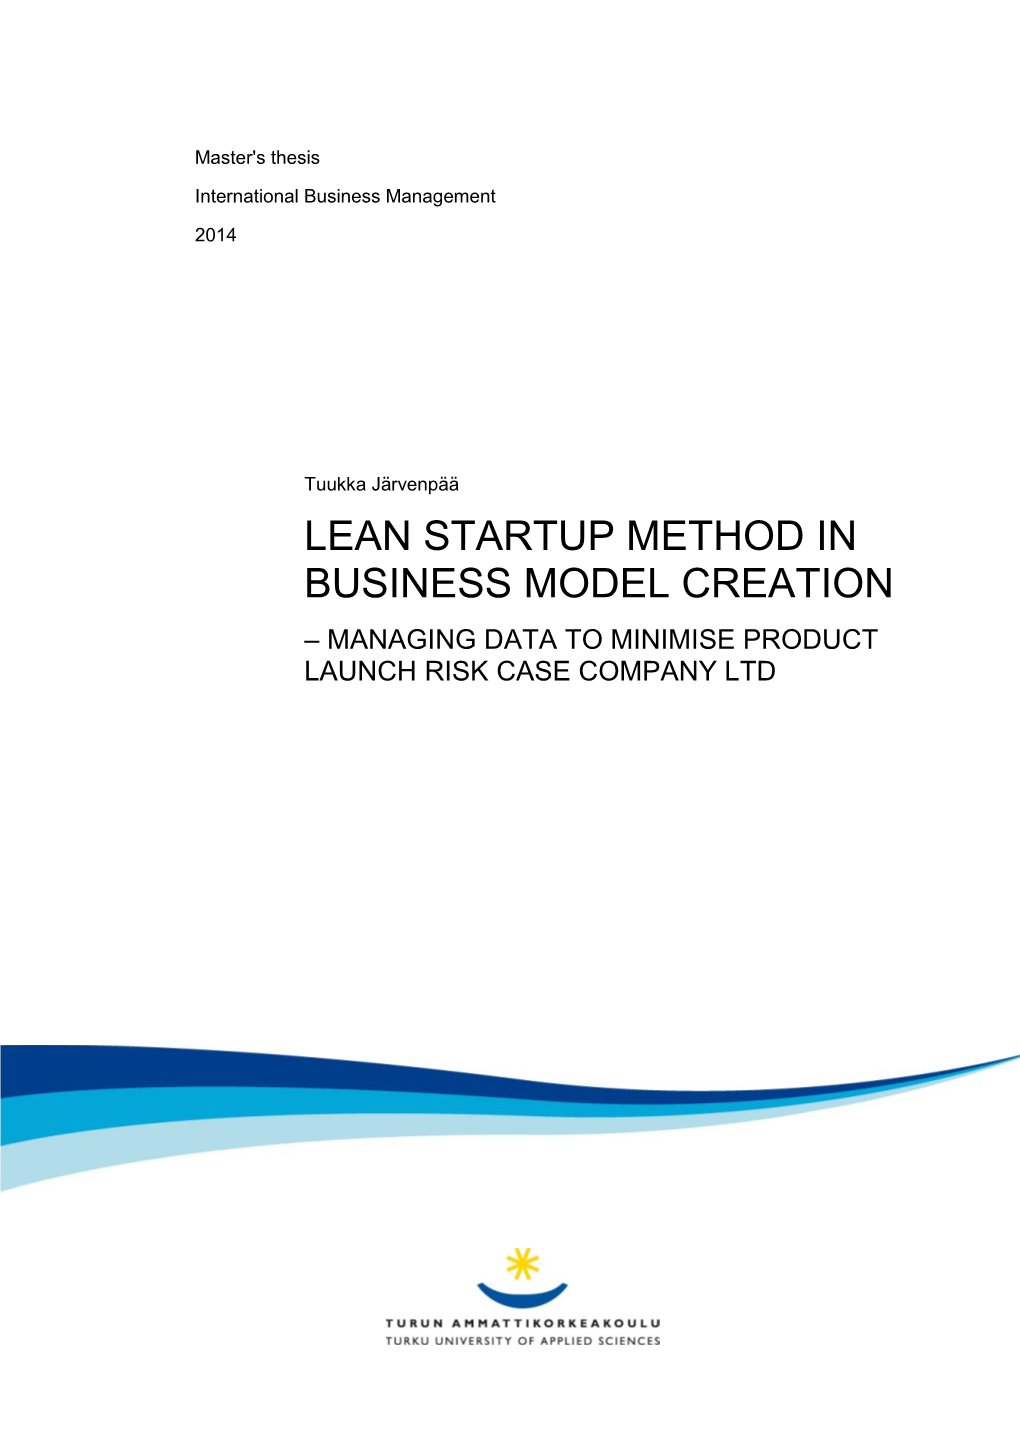 Lean Startup Method in Business Model Creation – Managing Data to Minimise Product Launch Risk Case Company Ltd